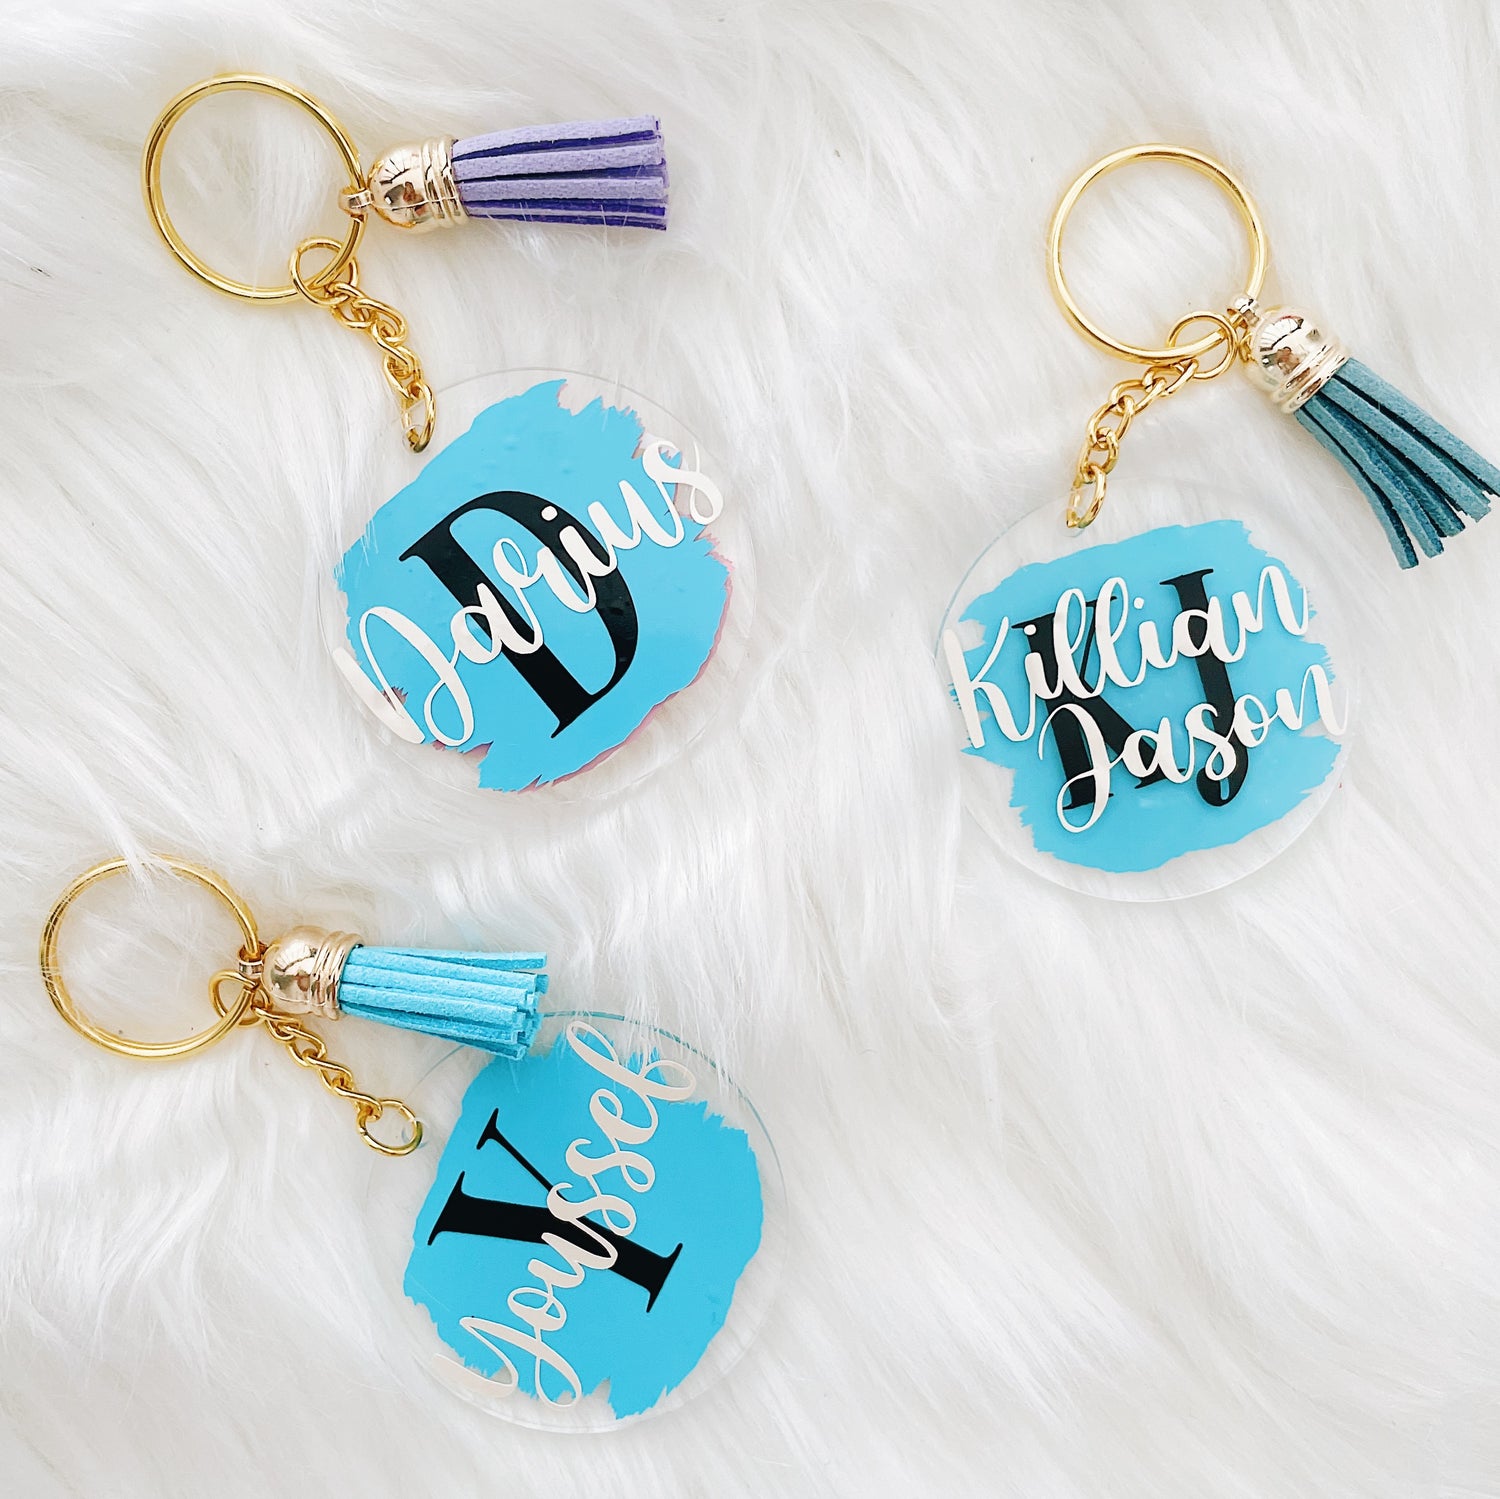 Personalized Acrylic Keychain – Curated Crafts